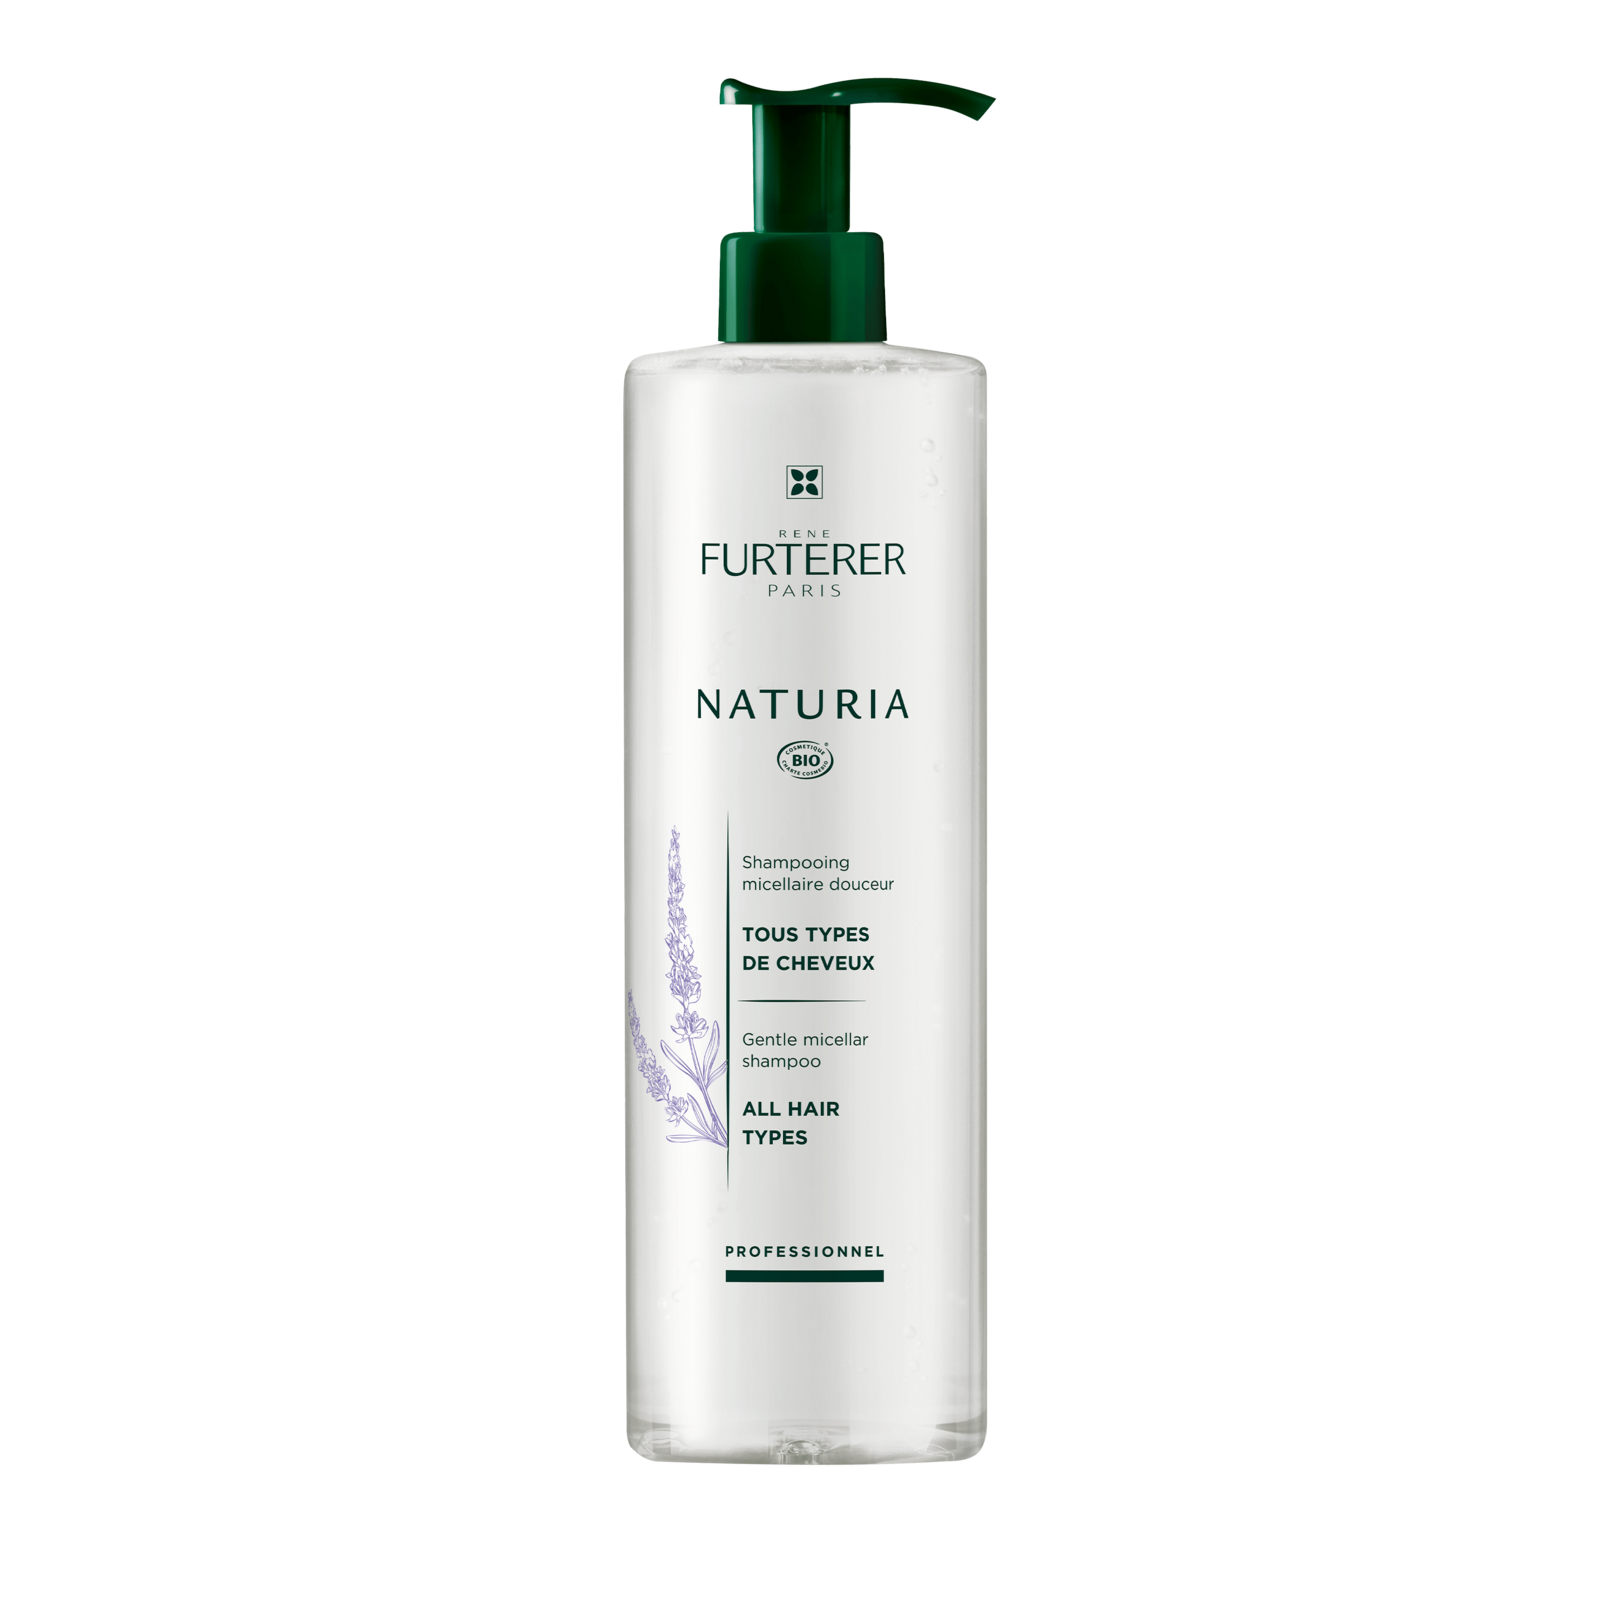 Gentle Micellar Shampoo - Ultra-gentle shampoo without sulfates